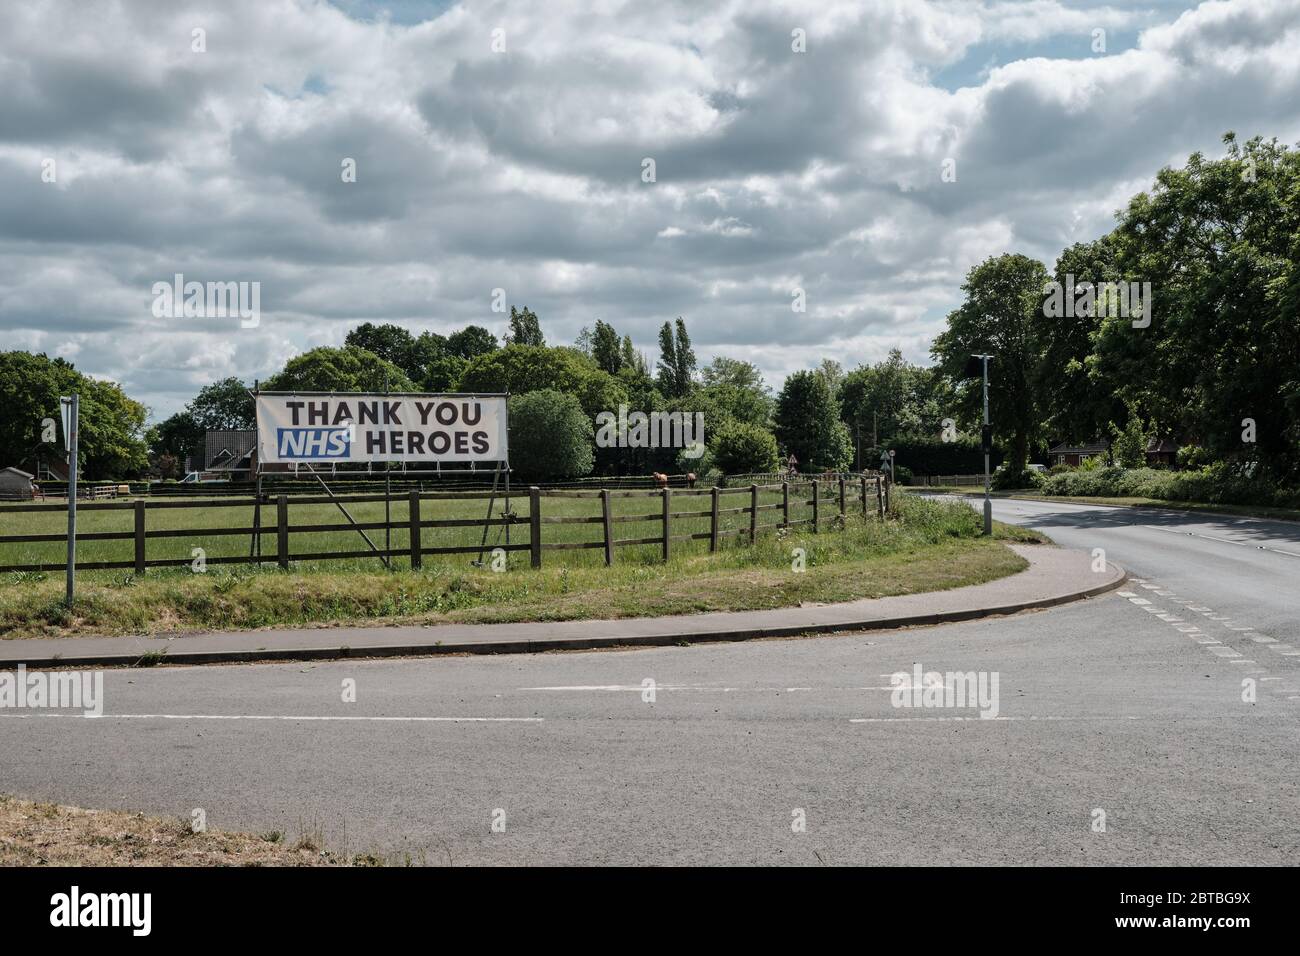 Thank you to NHS Staff sign in Coltishall, Norfolk, UK calling them heroes during the Coronavirus Pandemic. 24th May 2020. Stock Photo